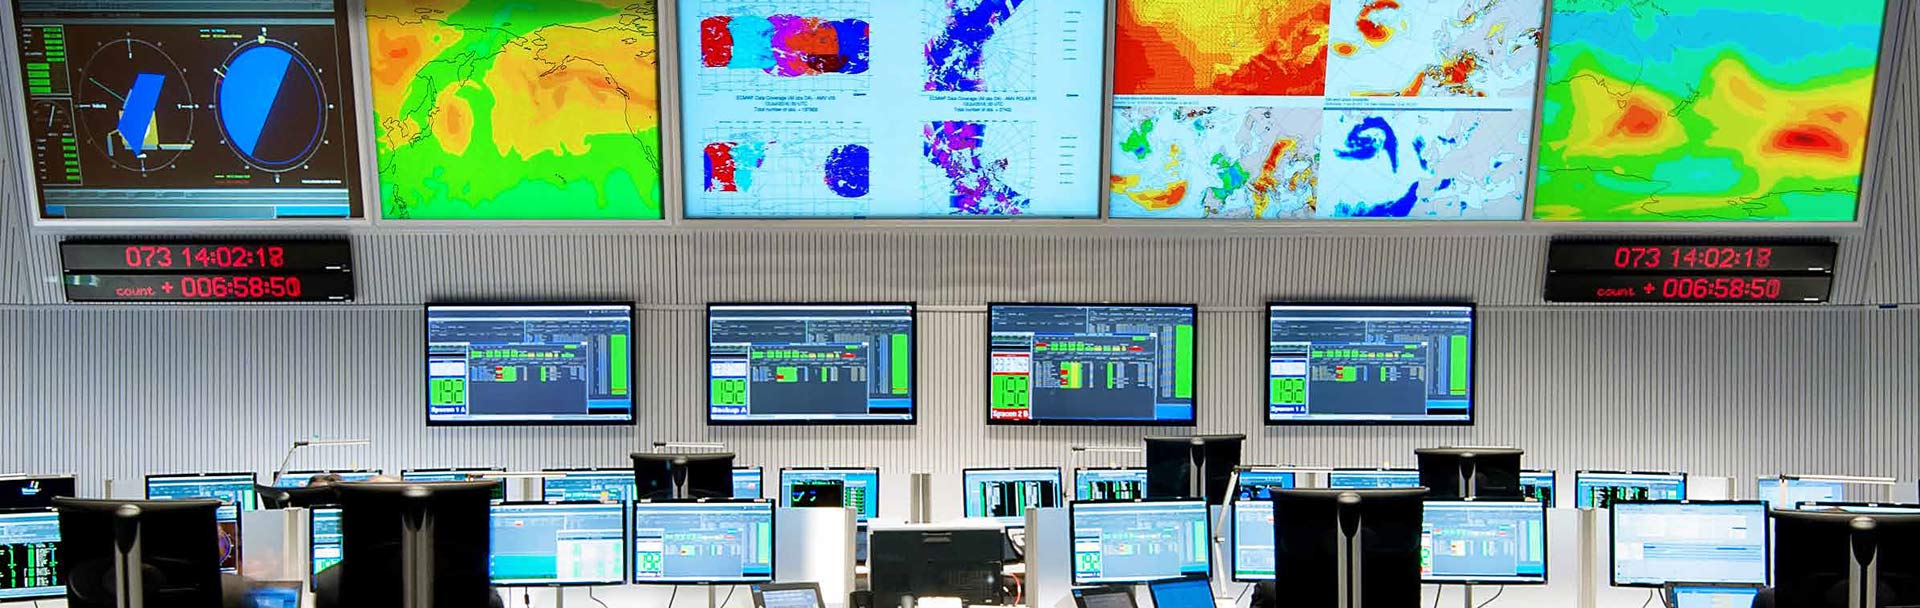 Use Case Hero Image - Weather Monitoring Control Room_1920x608